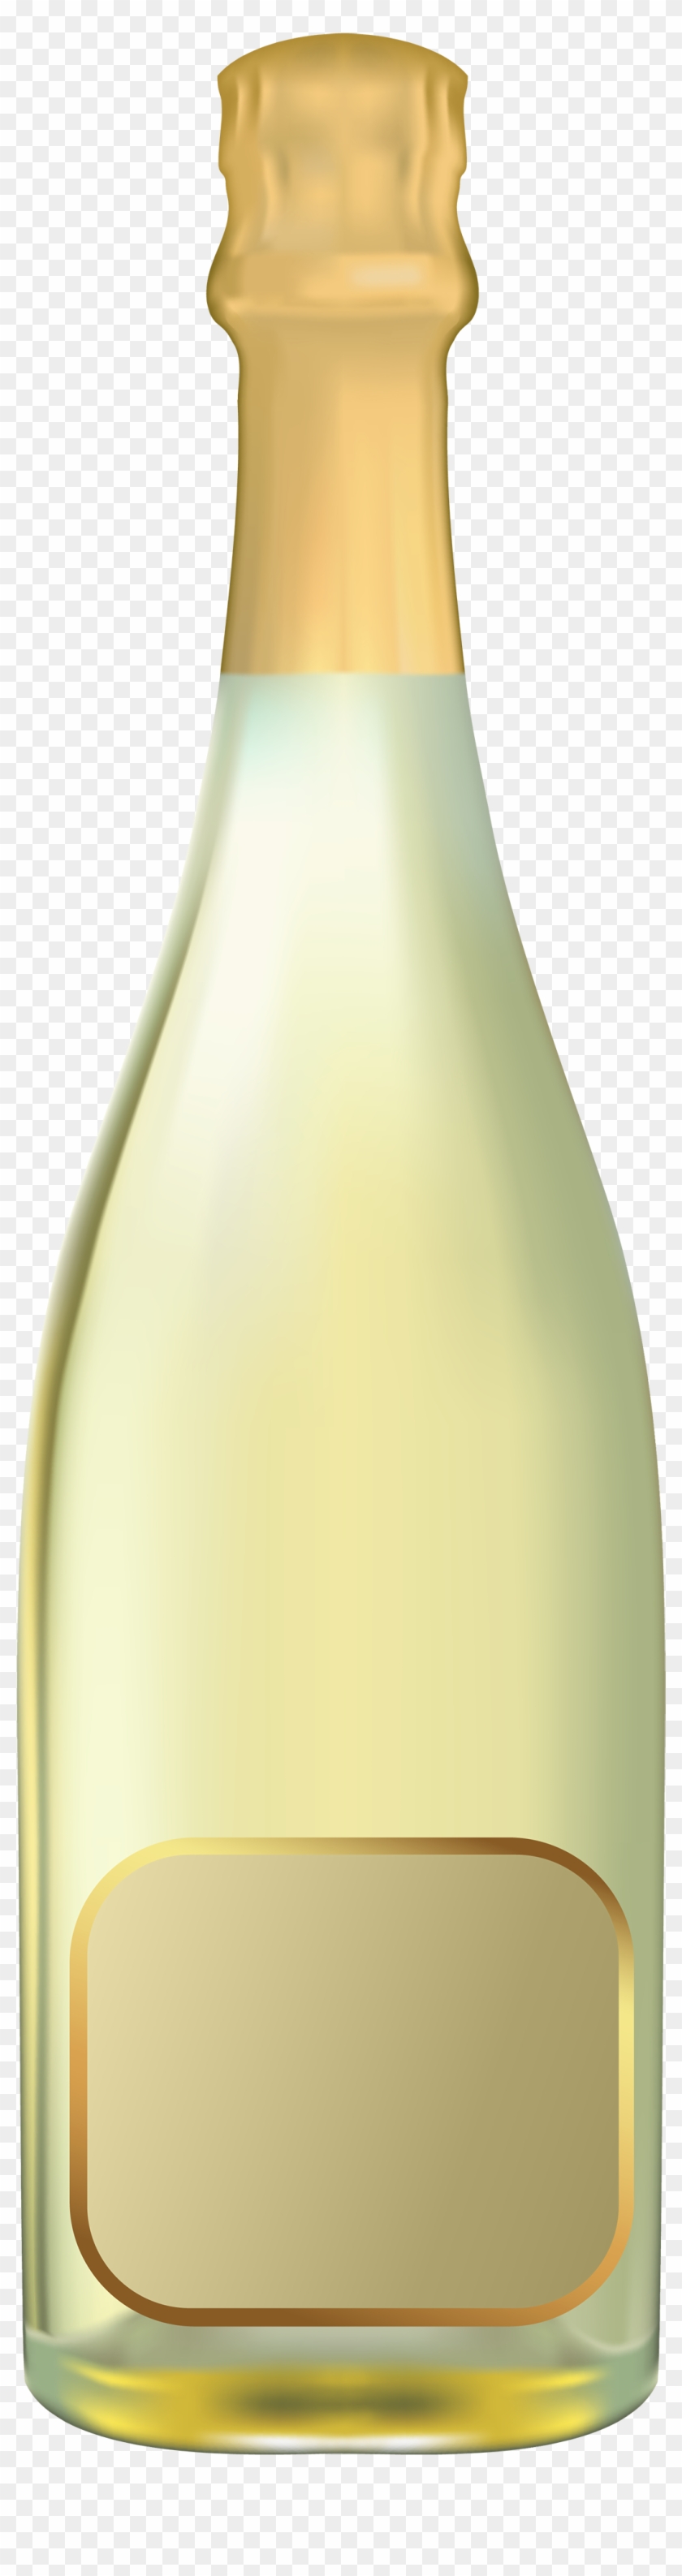 Wine Clipart Champagne Bottle - Champagne Bottle Clipart Png #391248